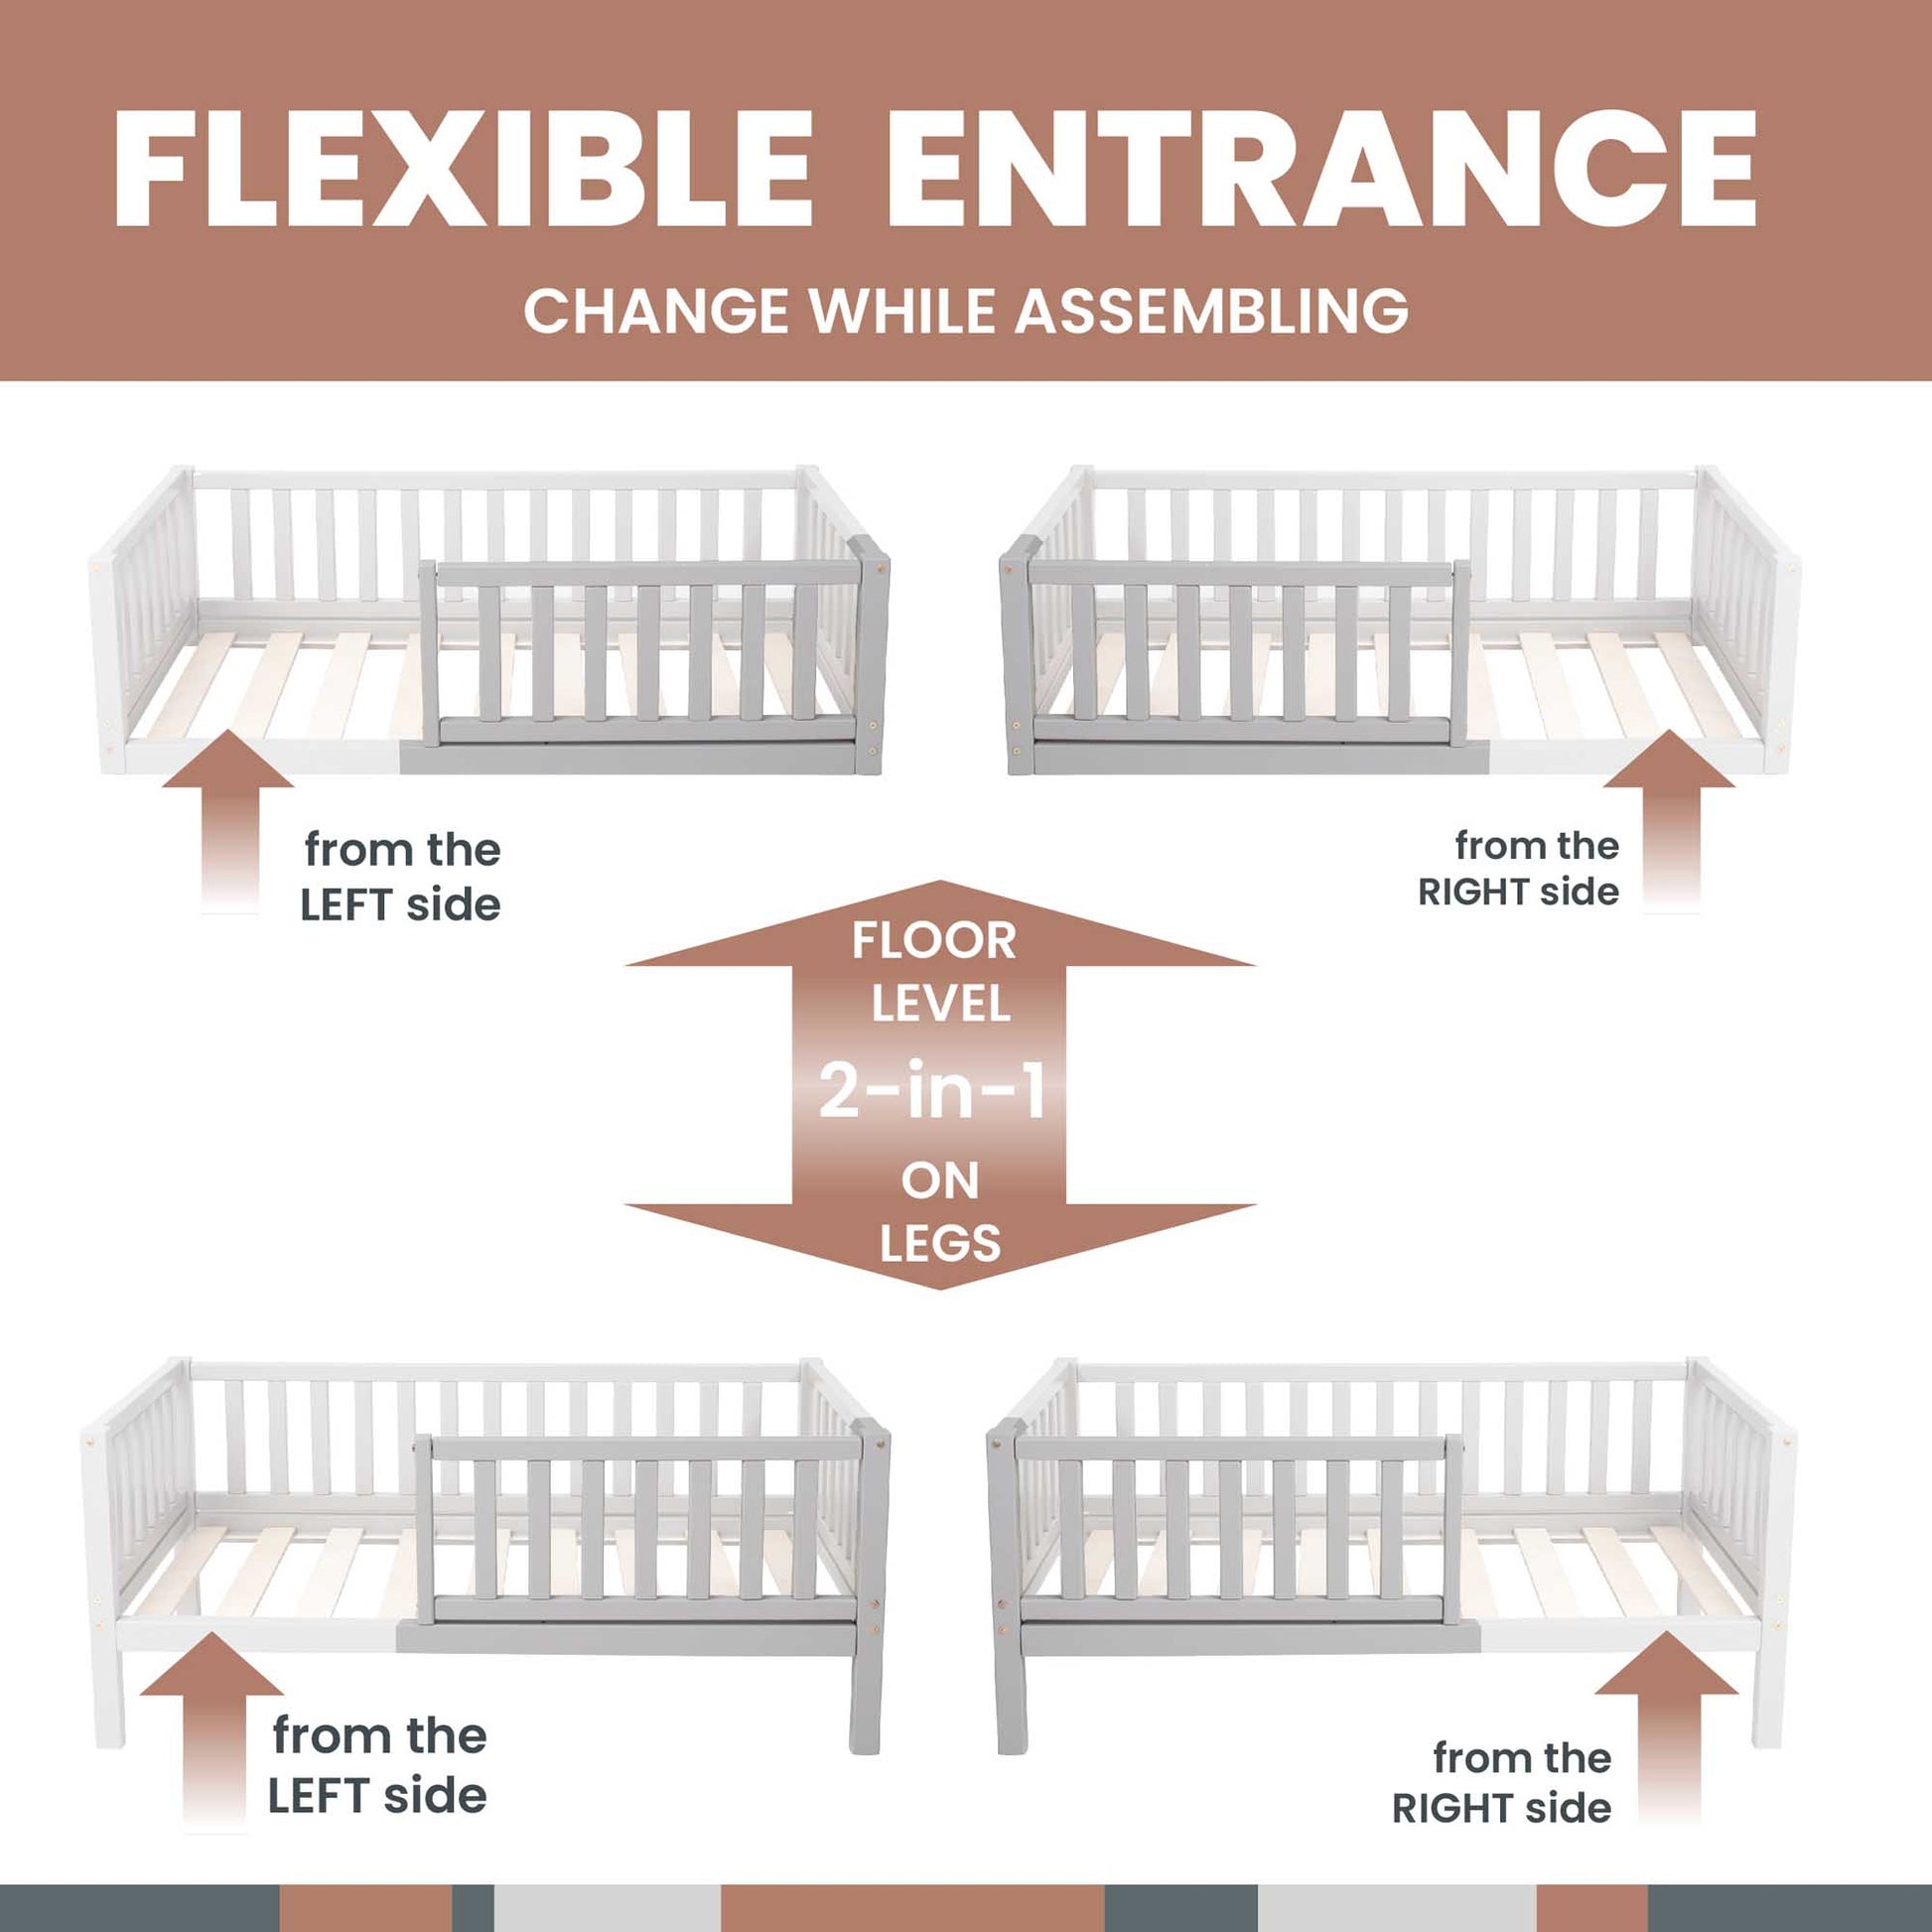 A diagram illustrating the step-by-step assembly process for a long-lasting Sweet Home From Wood 2-in-1 toddler bed on legs with a vertical rail fence, featuring a flexible entrance.